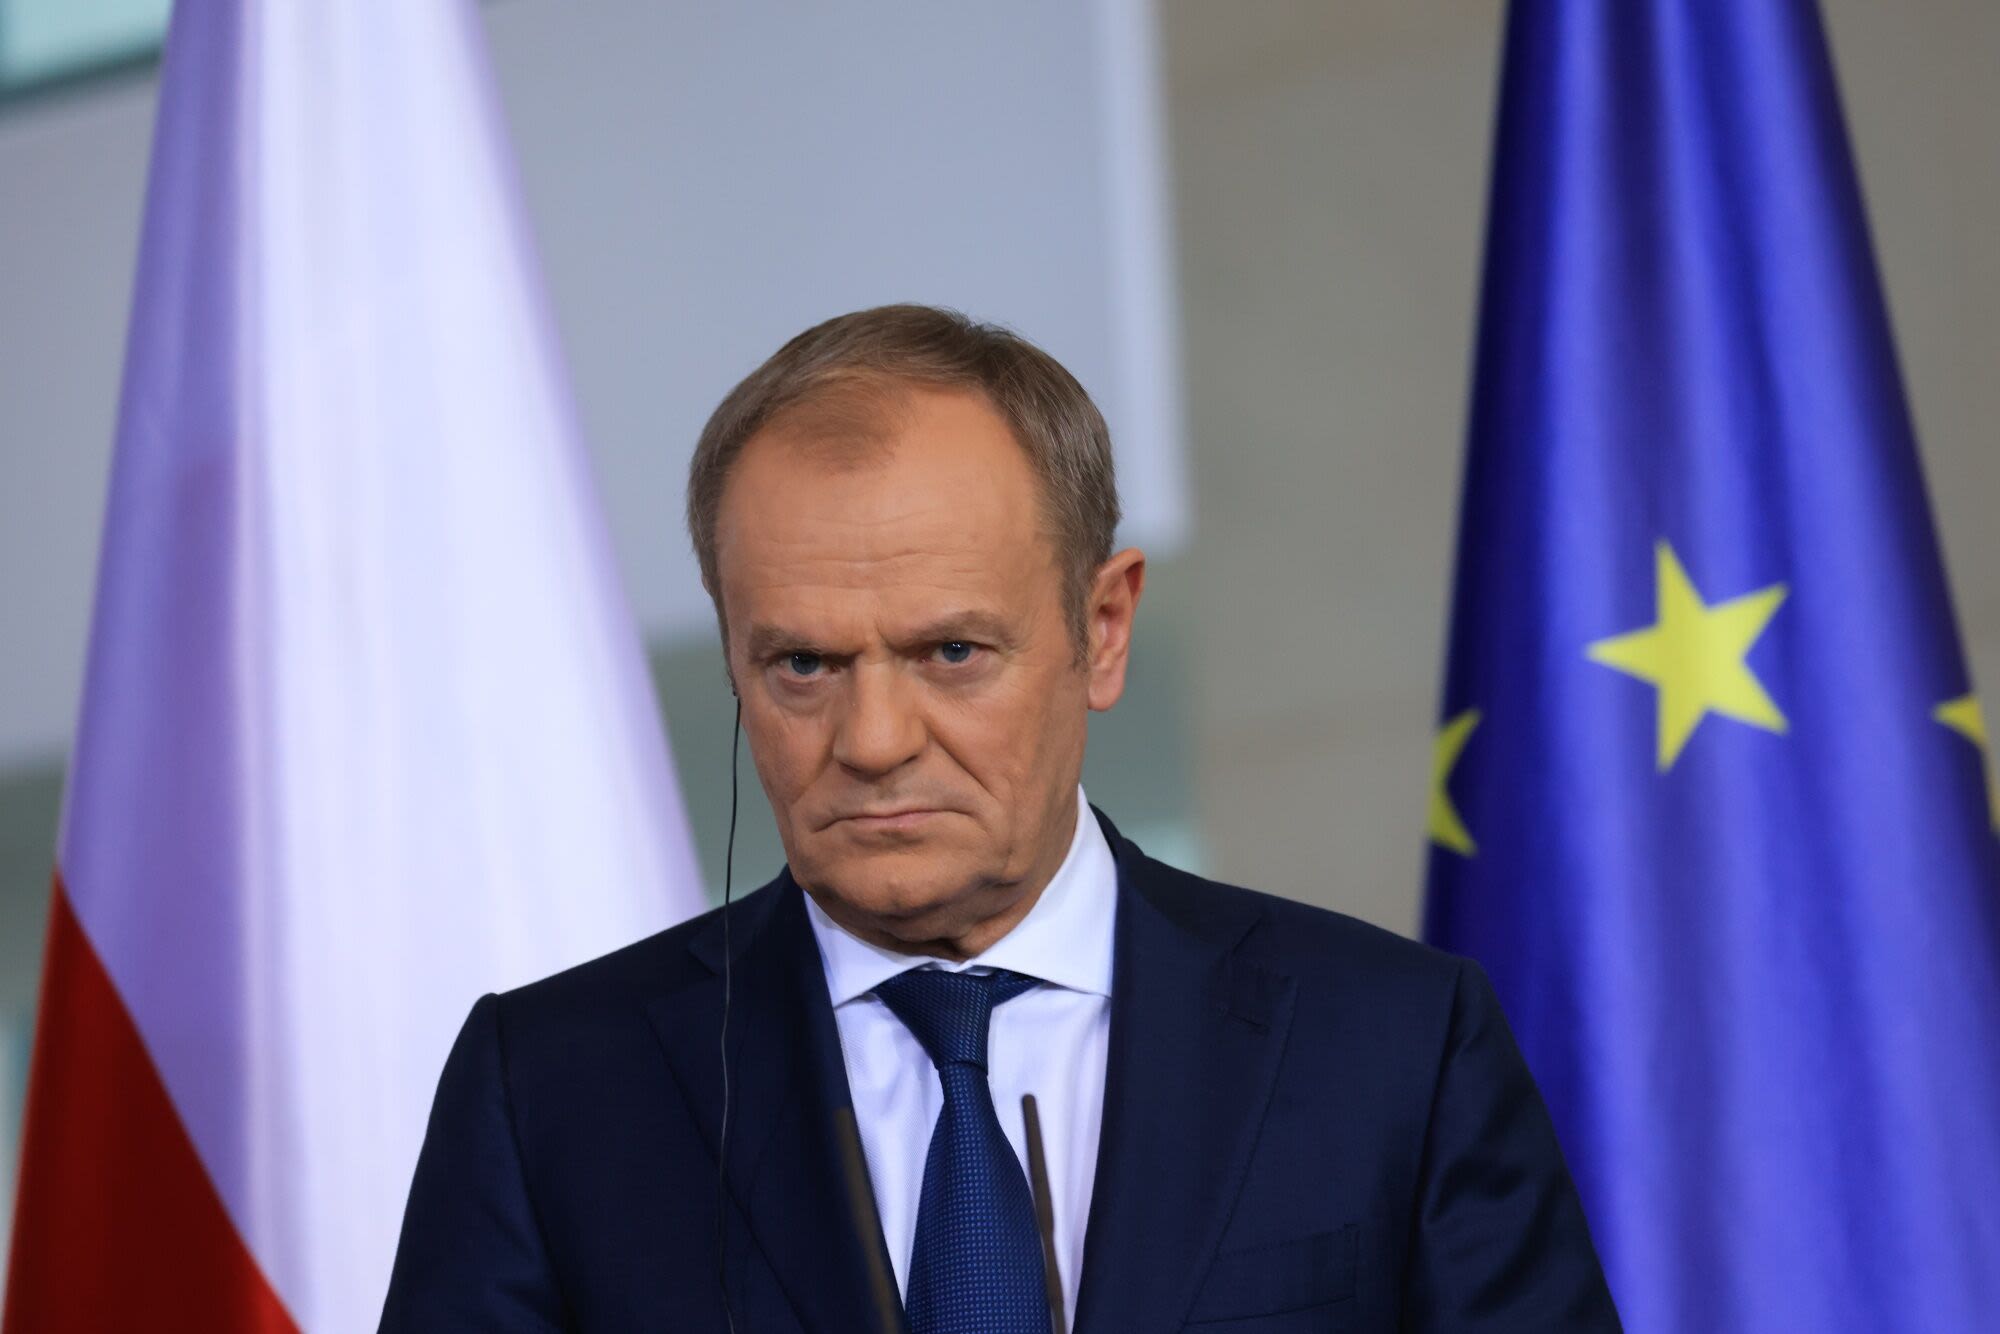 Tusk Says He’ll Overhaul Cabinet Next Month Ahead of EU Election